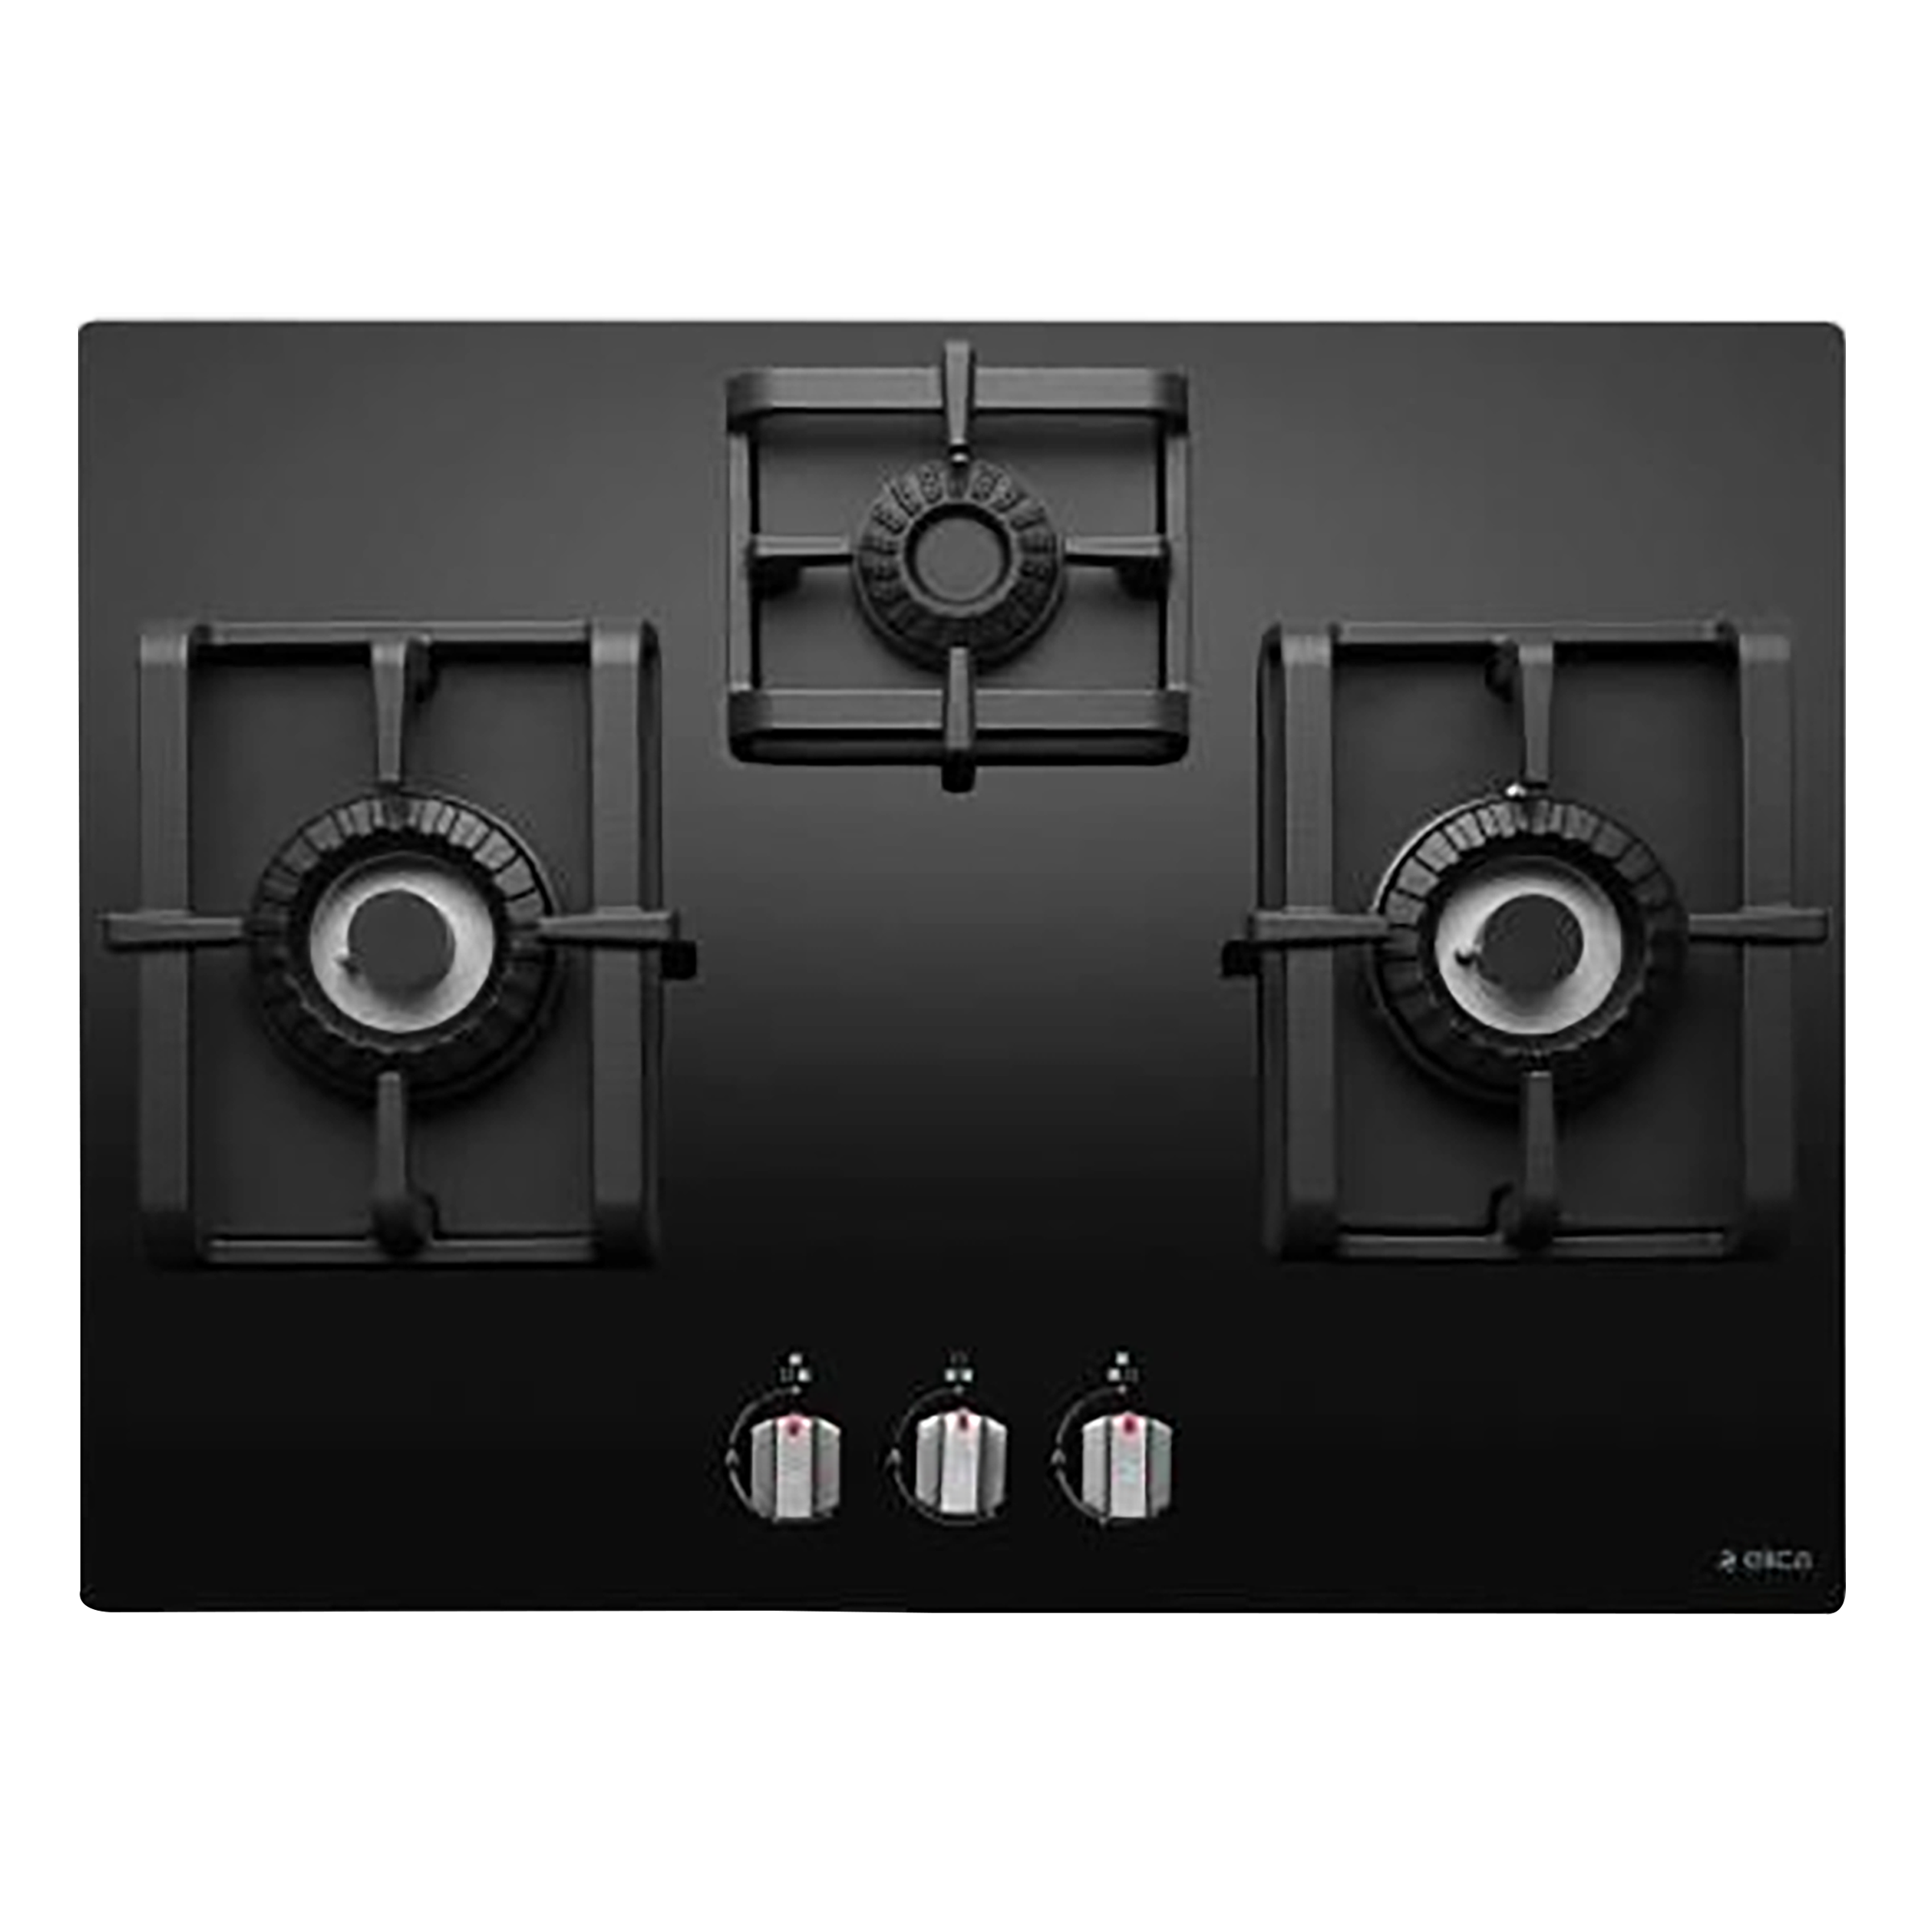 Elica Pro MFC 3 Burner Glass Built-in Gas Hob (Electric Auto Ignition, 2680, Black)_1